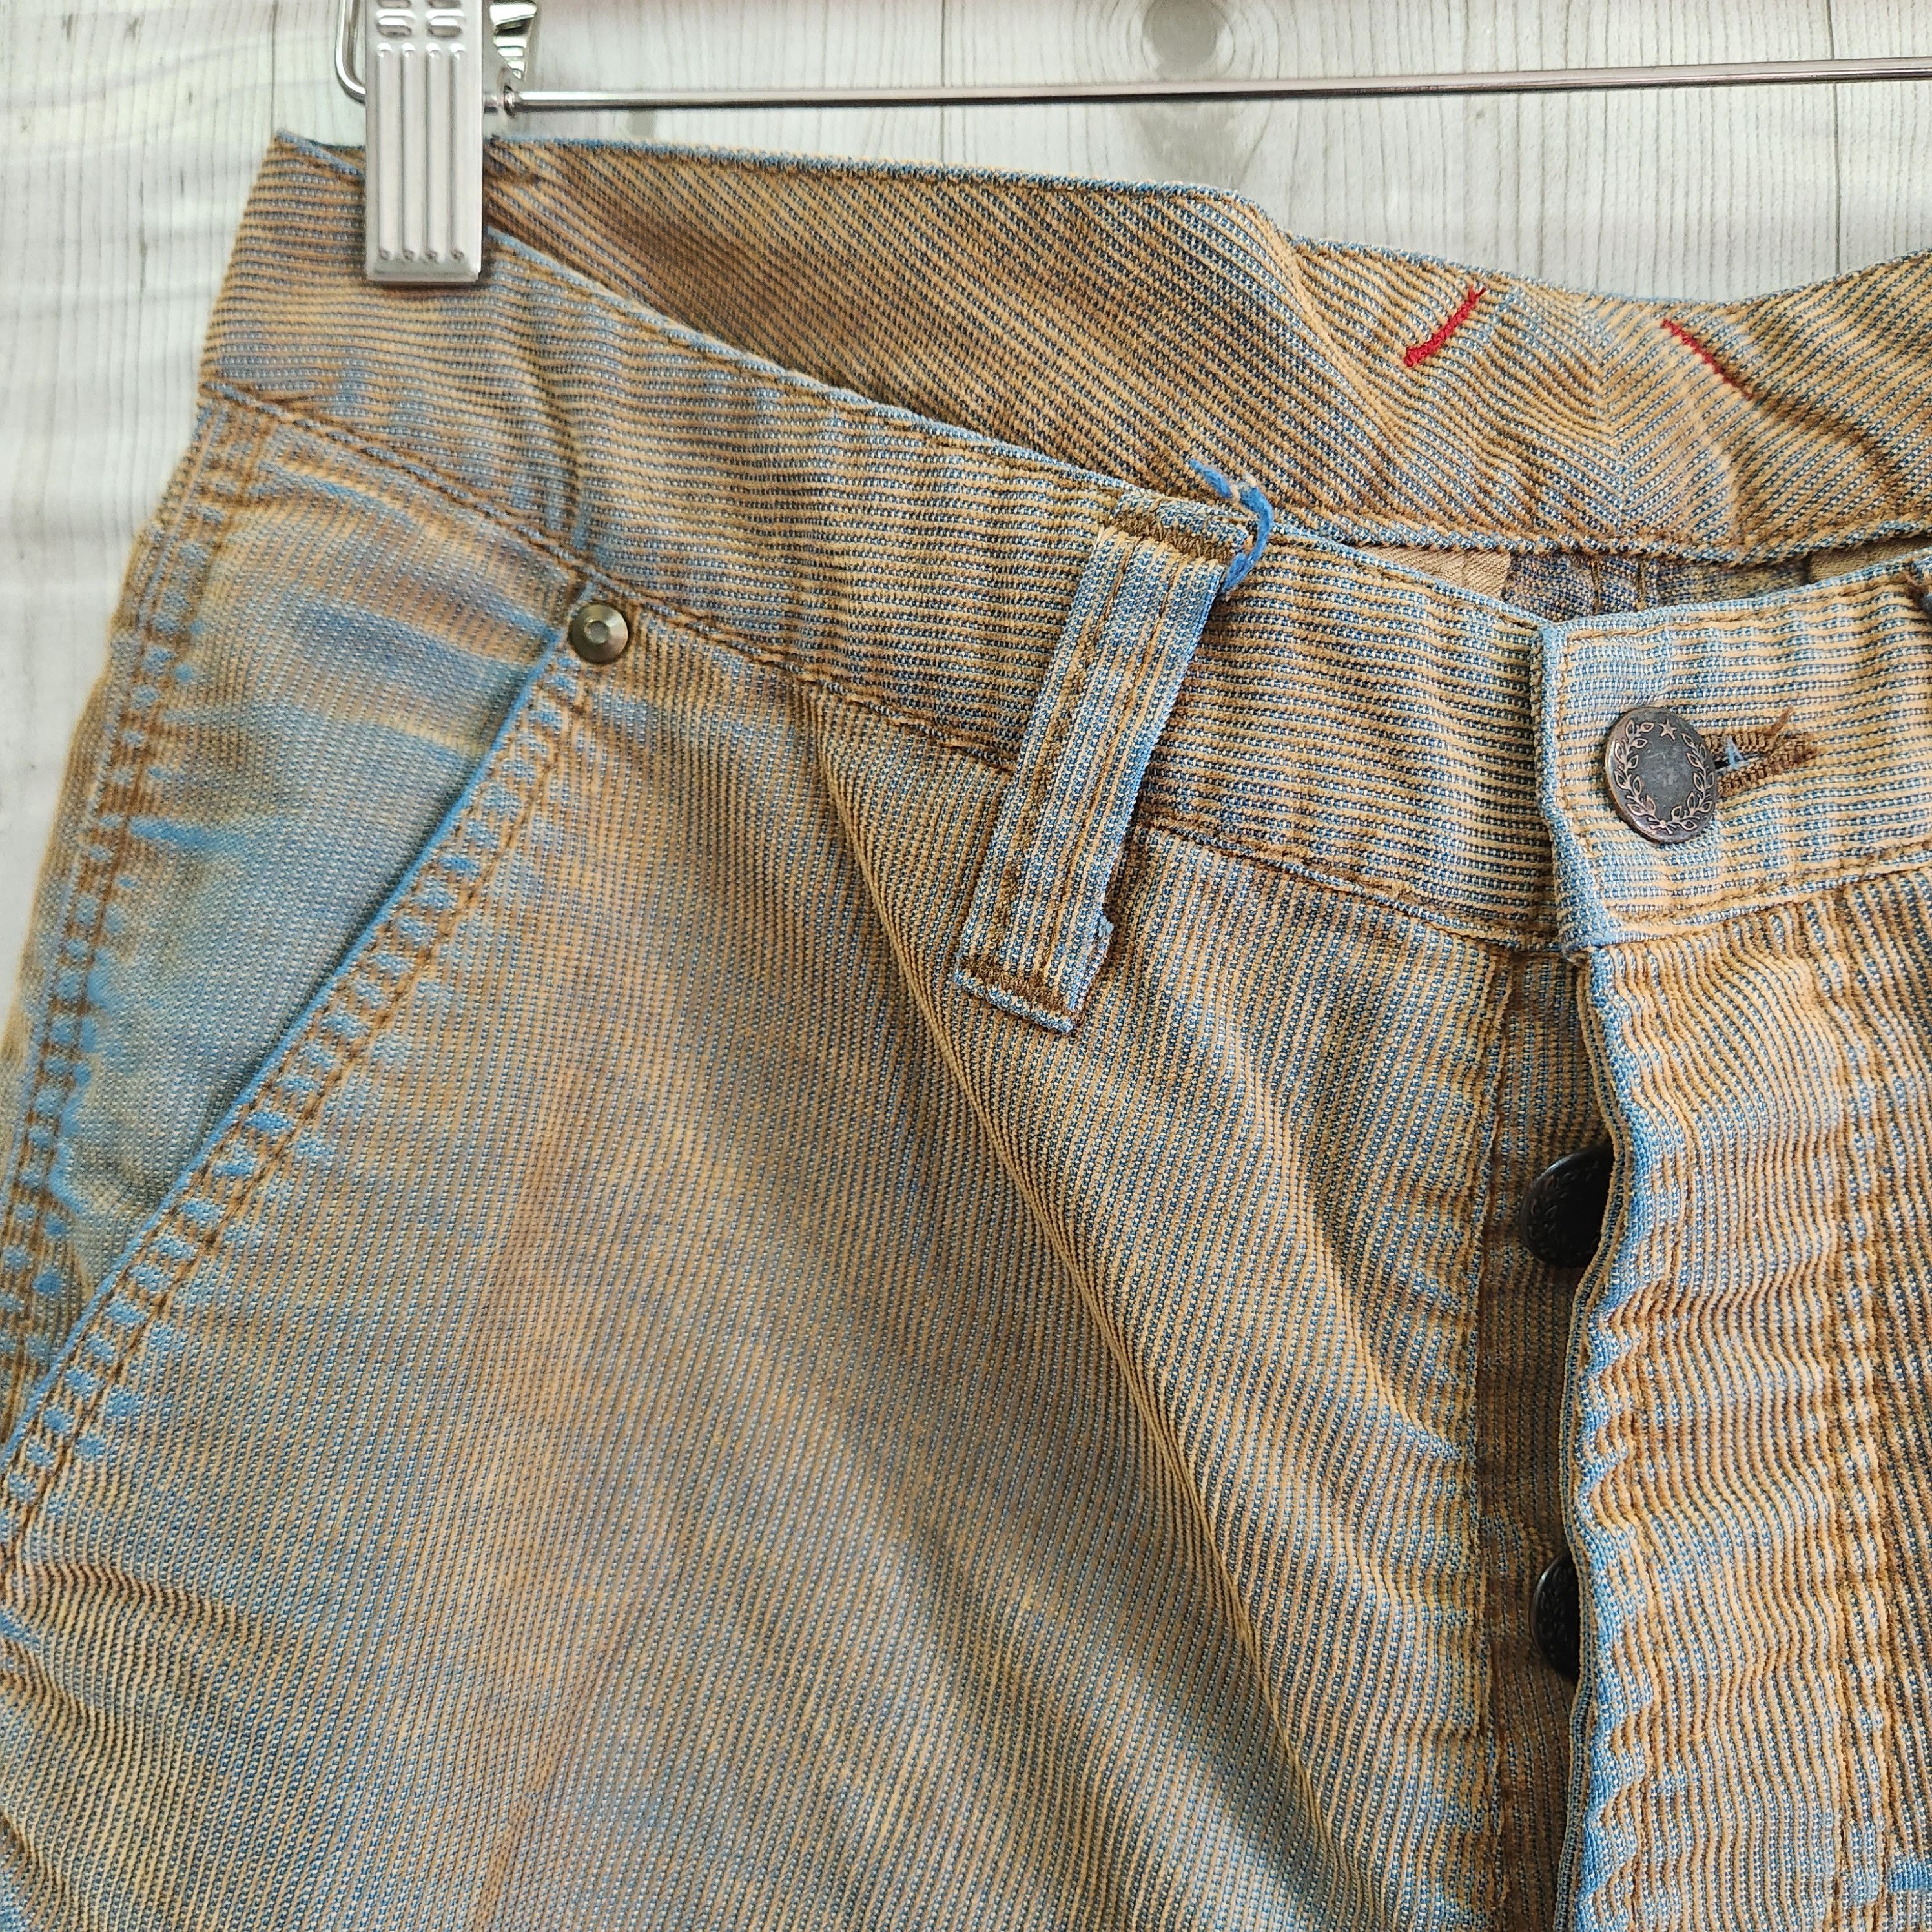 Key Acquisitions - Acquiesce Distressed Faded Bluish Denim Jeans Japanese - 5